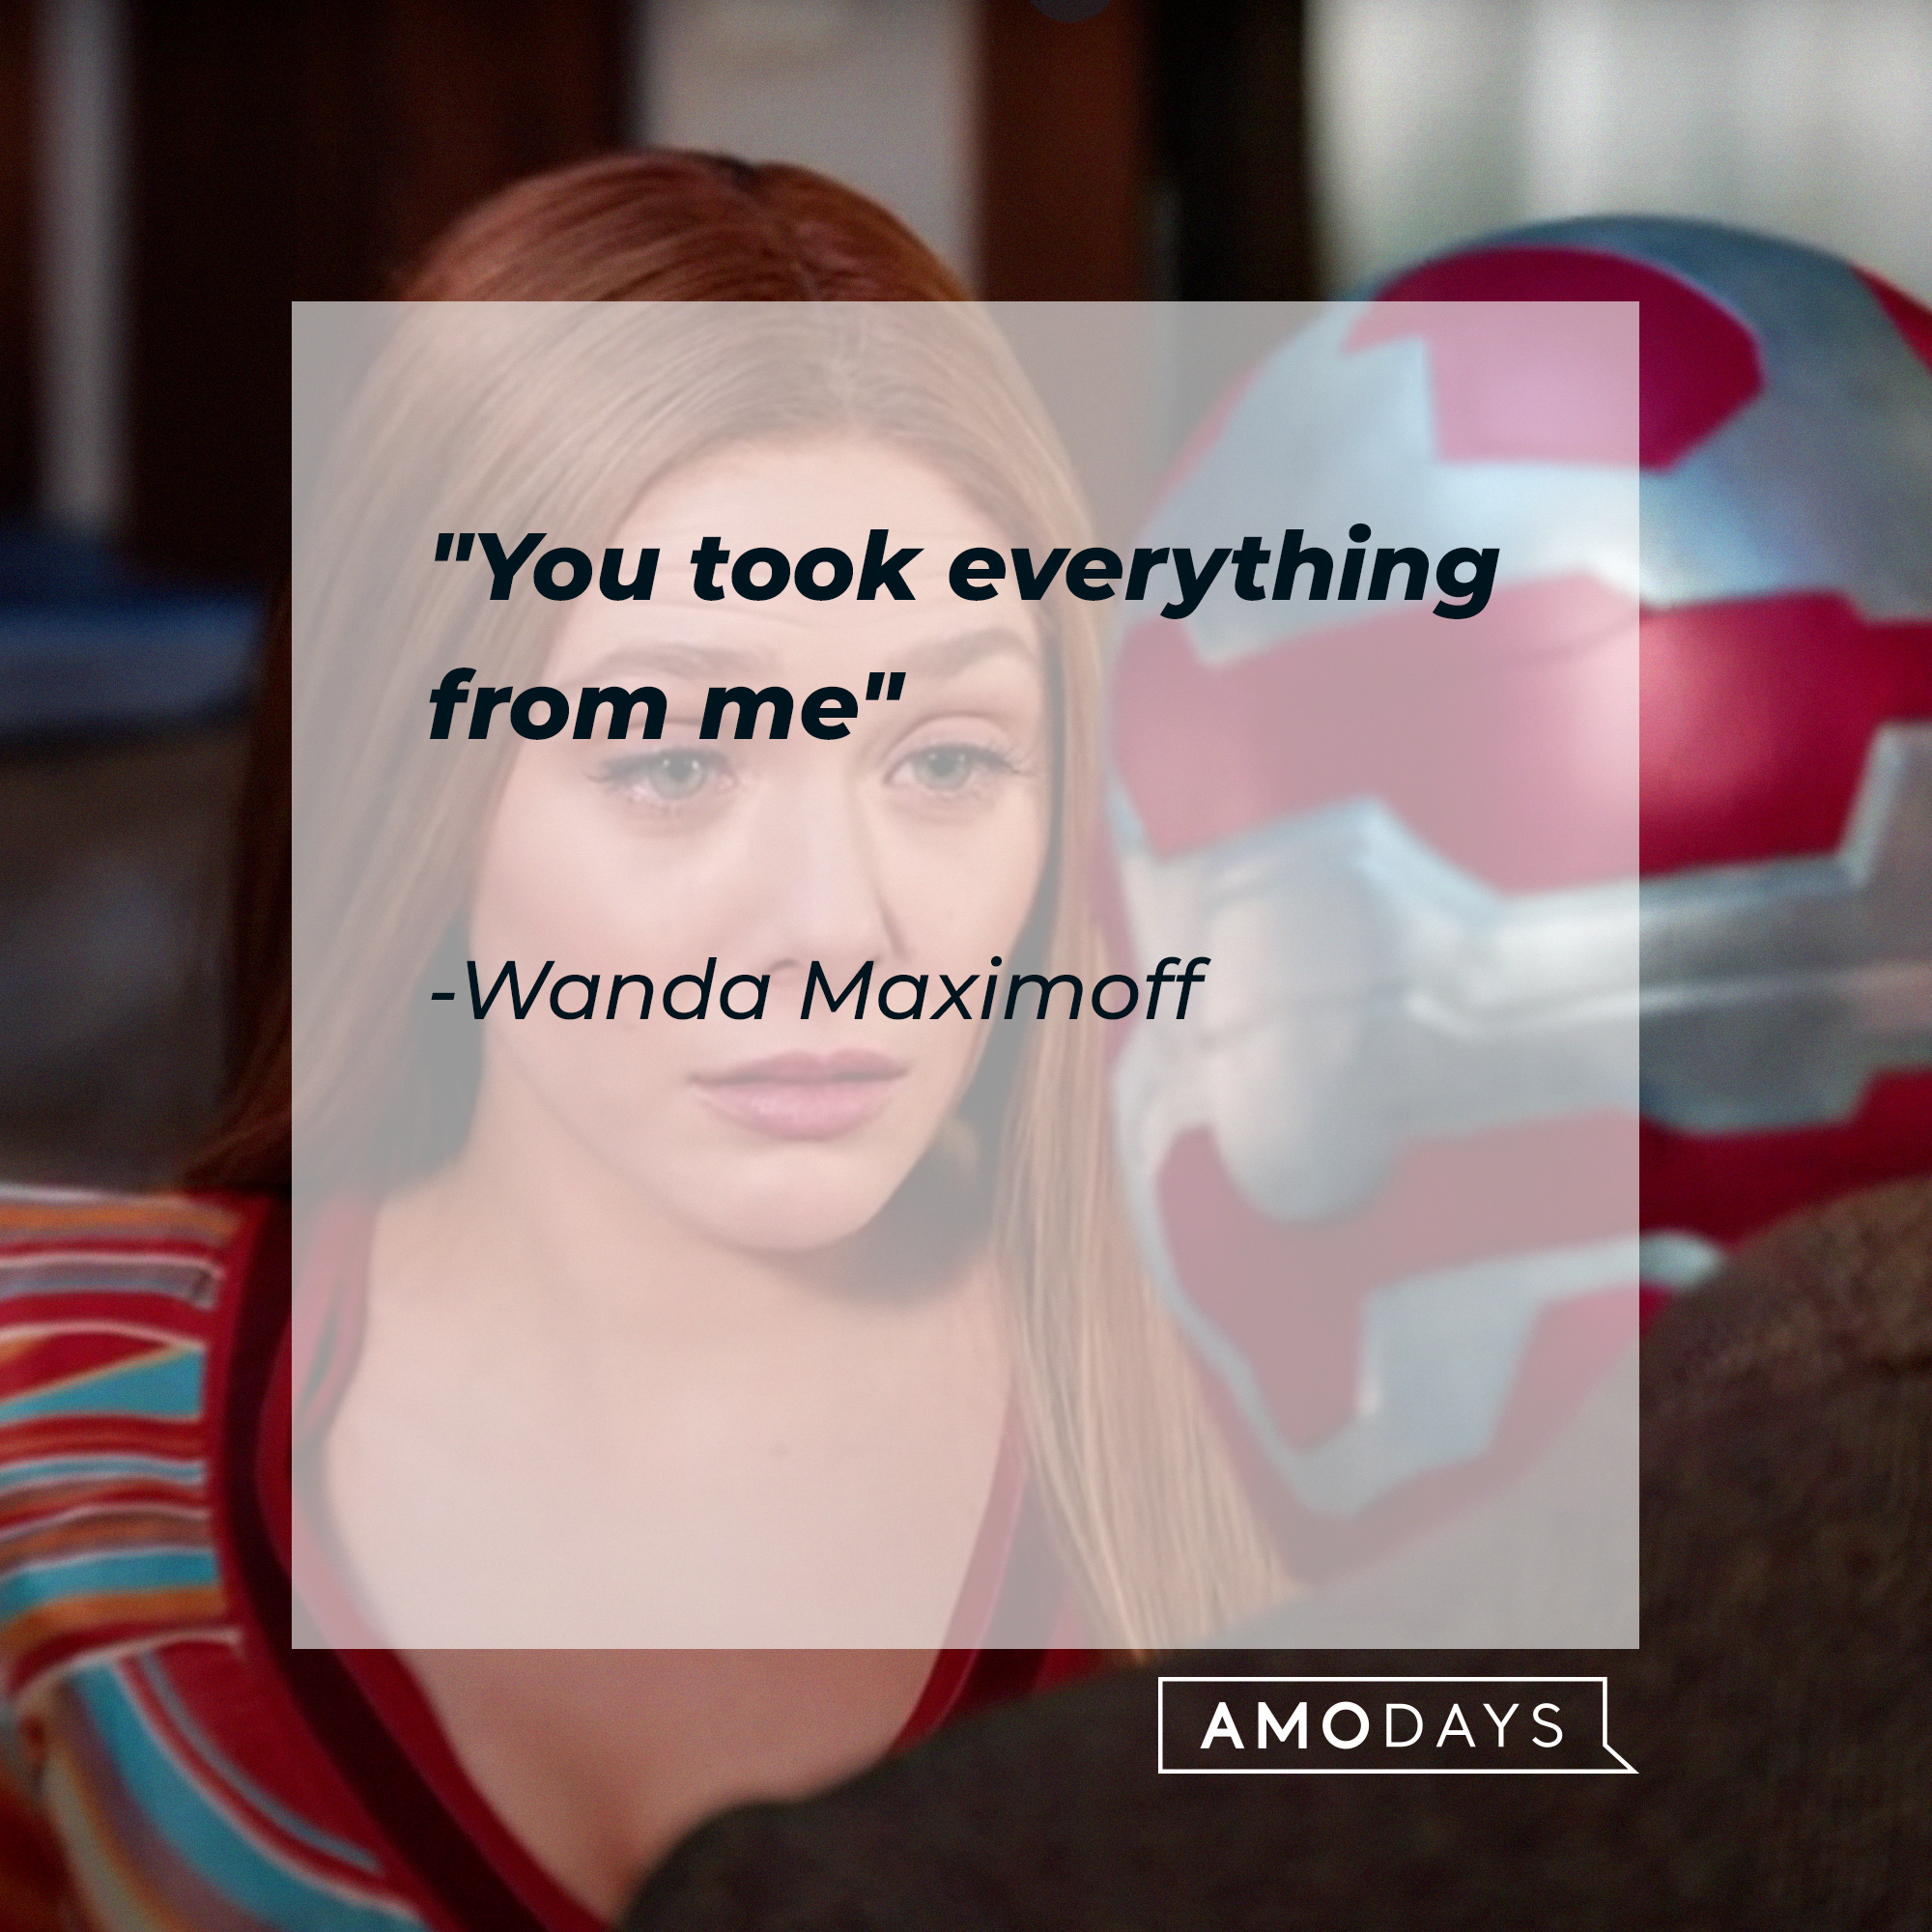 Wanda Maximoff's quote: "You took everything from me" | Source: Facebook/wandavisionofficial